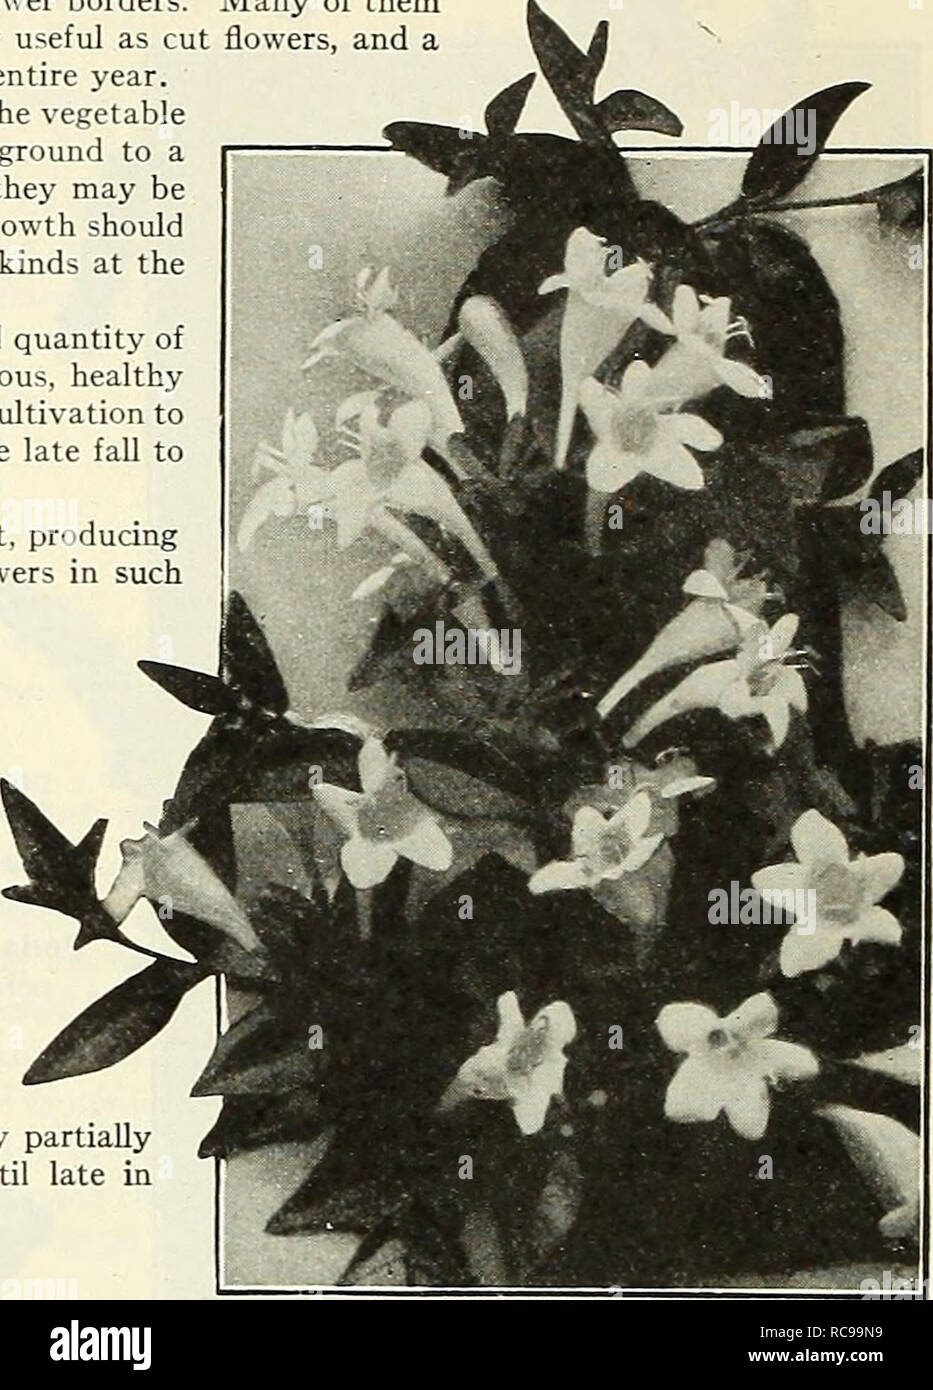 . Dreer's garden book 1923. Seeds Catalogs; Nursery stock Catalogs; Gardening Equipment and supplies Catalogs; Flowers Seeds Catalogs; Vegetables Seeds Catalogs; Fruit Seeds Catalogs. AlTIIE. W'lLLI.iM R. S.MITII Abelia Chinensis Grandiflora Aralia Spinosa (Hercules Club, Angelica Tree, or Devil's Walking-slick). A singular native tree-like Shrub, growing from 10 to IS feet high, with ver&gt;' prickly stems, pinnate leaves and immense panicles of white flowers in August, an odd tropical looking plant. Sl-OO each. Azalea Amoena. This little gem is practically evergreen, and in late spring the Stock Photo